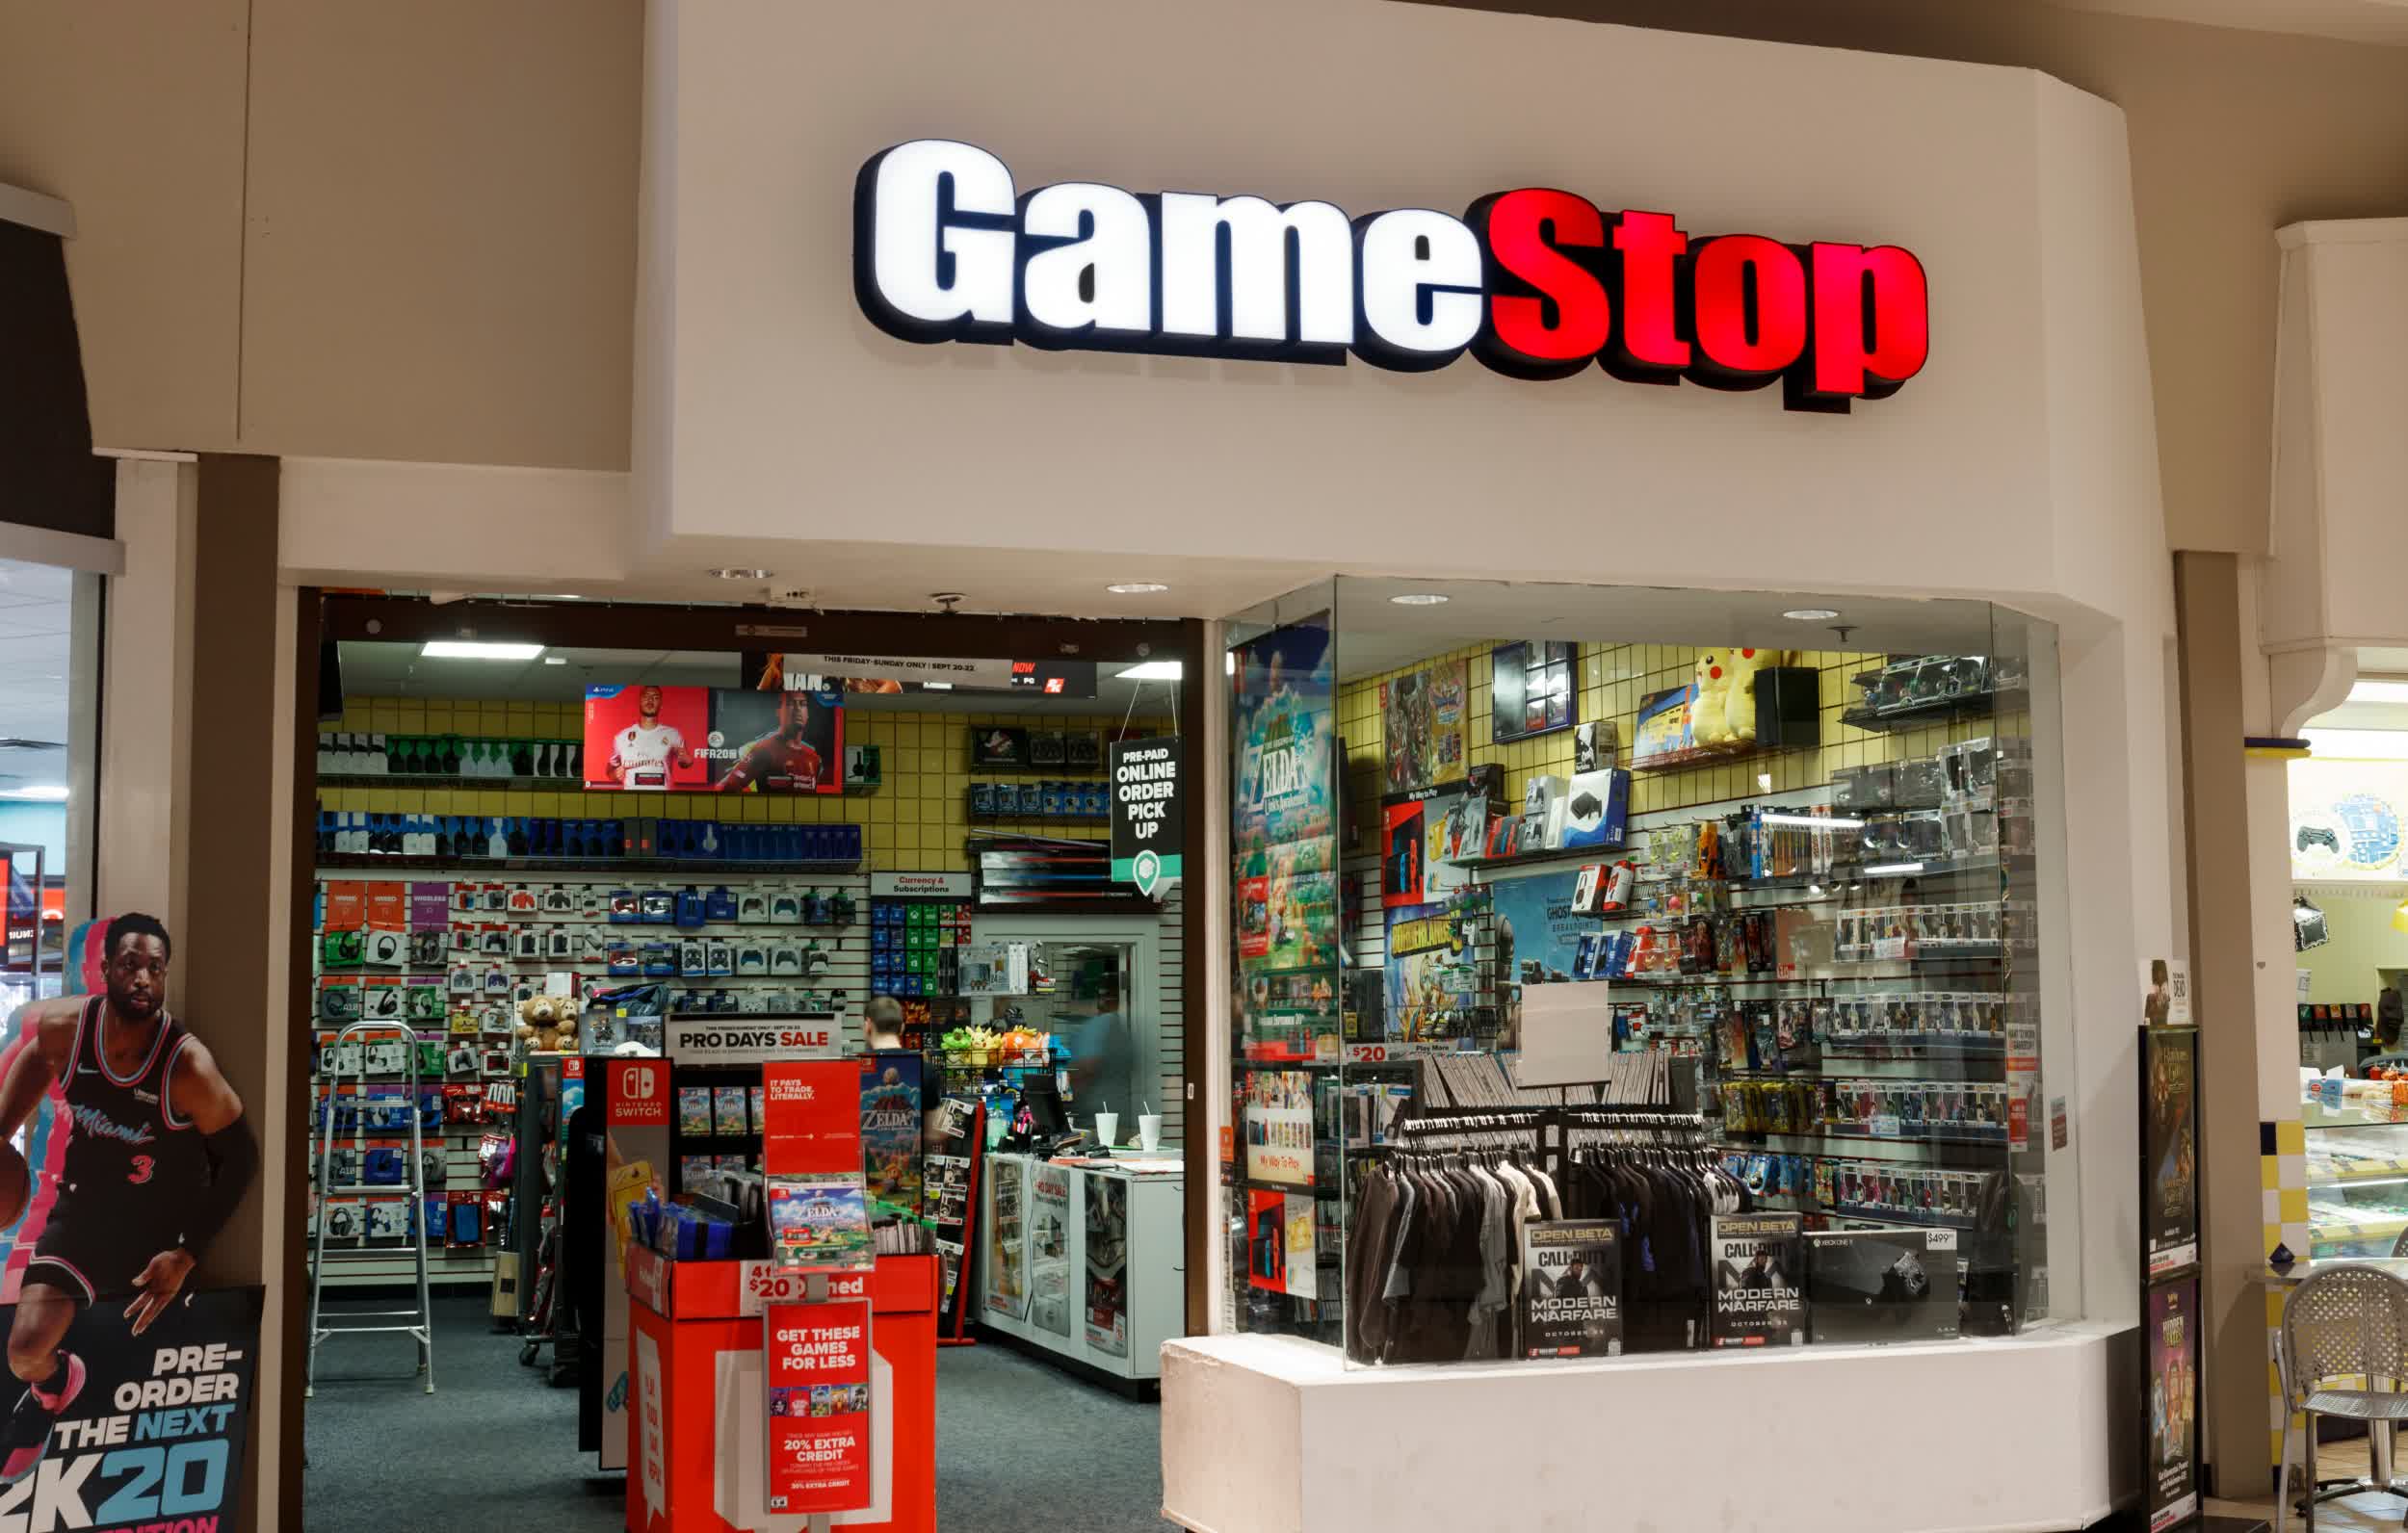 GameStop will offer multiple ways to buy next-gen Xbox and PlayStation